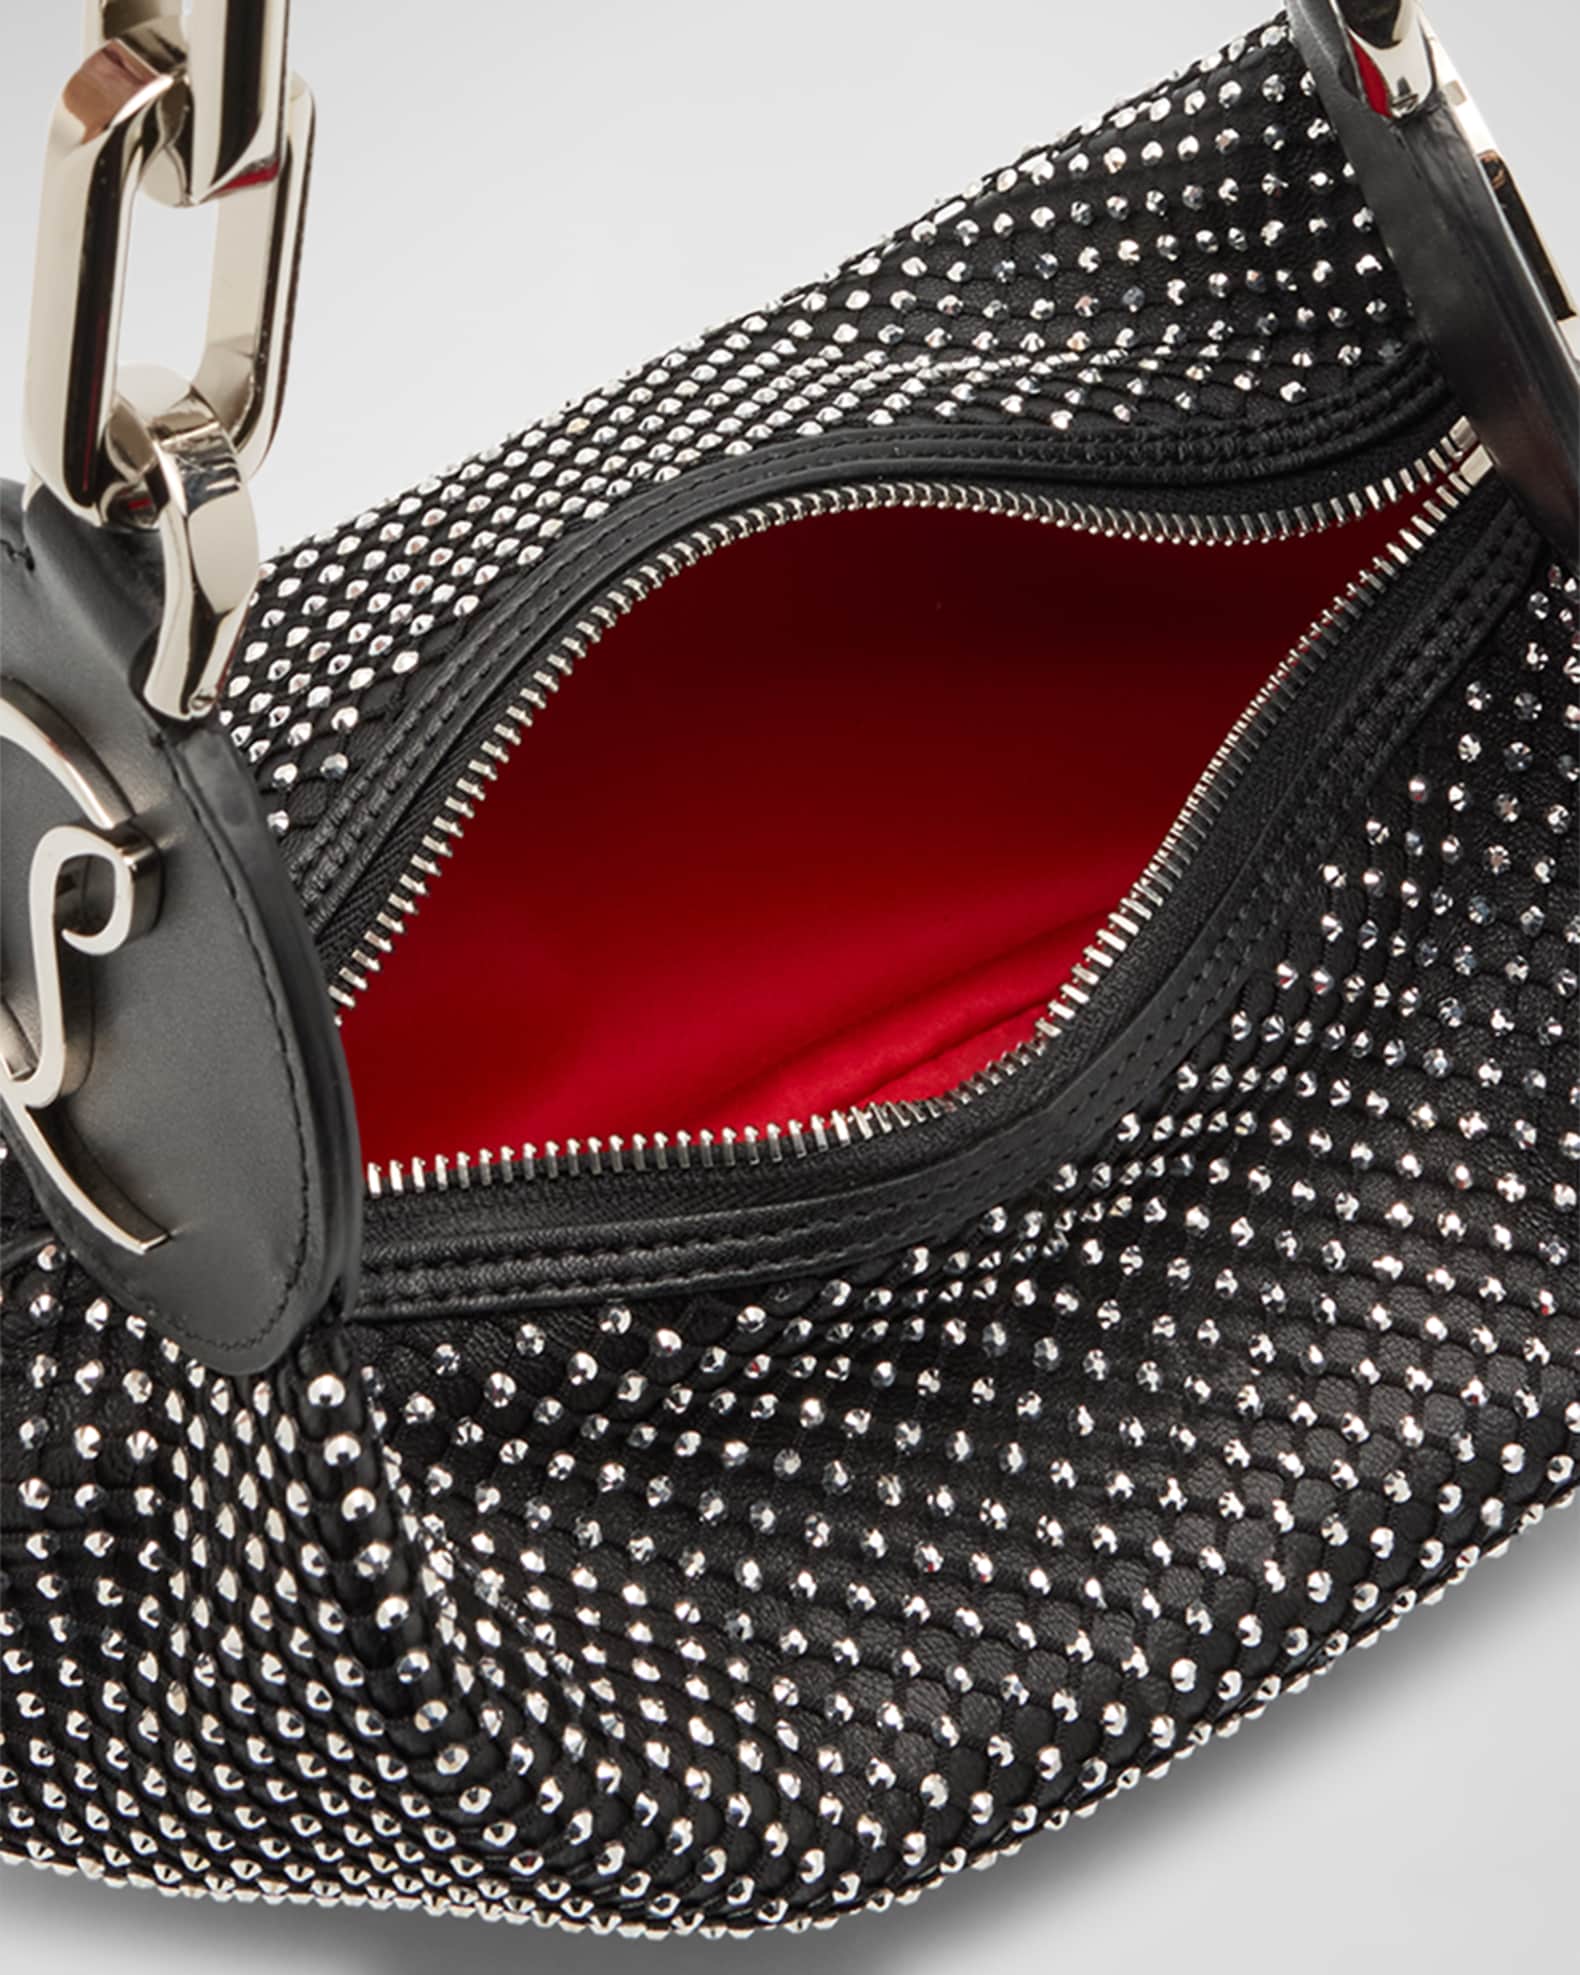 Christian Louboutin Le 54 Chain Shoulder Bag in Strass Netting 